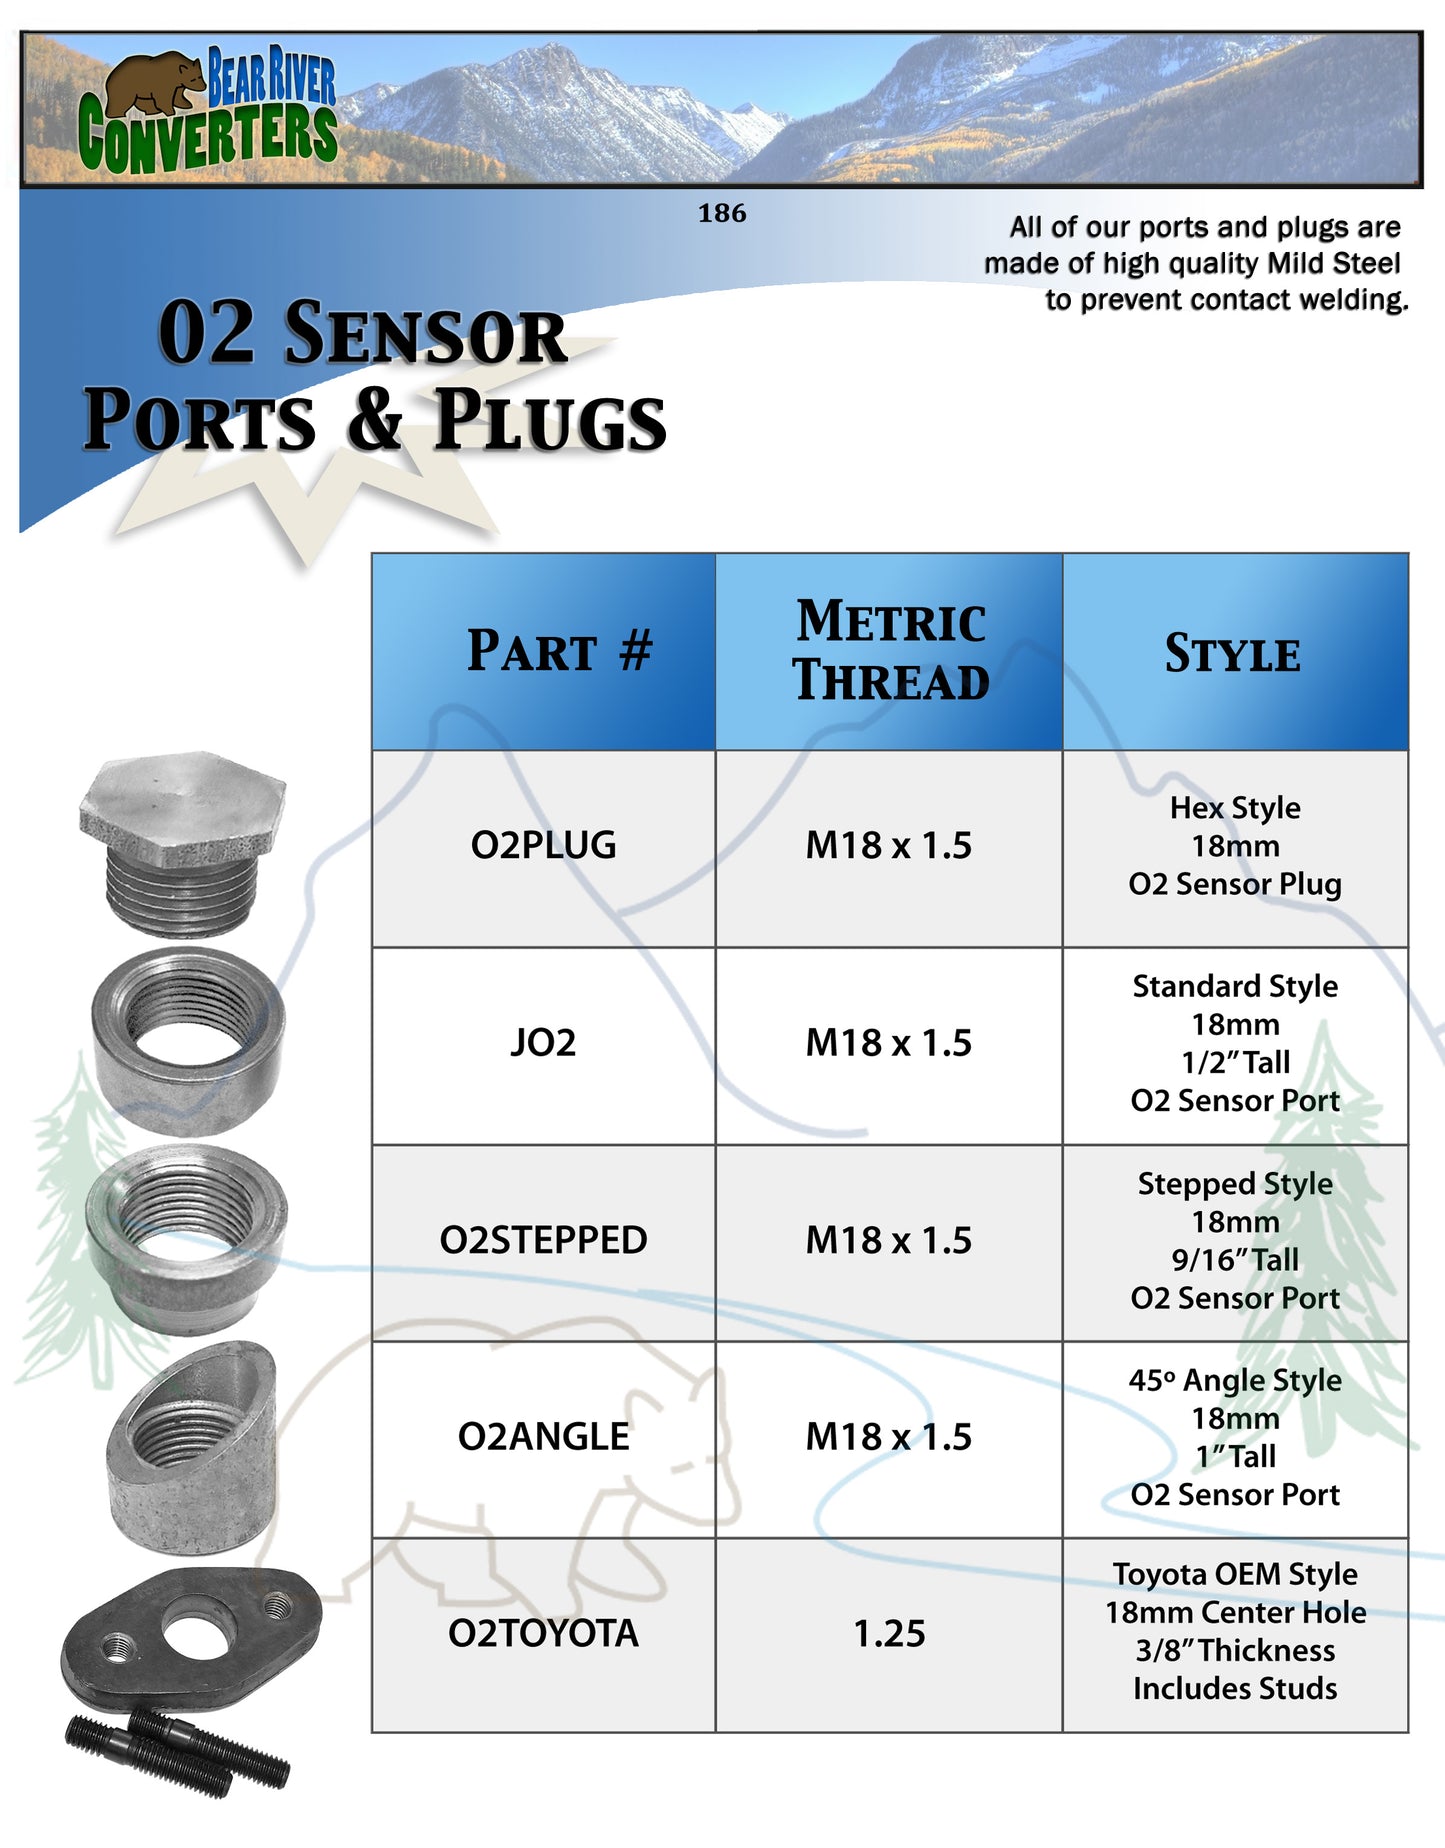 O2STEPPED O2 Oxygen Sensor Stepped Style Bung Port Boss Nut Fitting 18mm